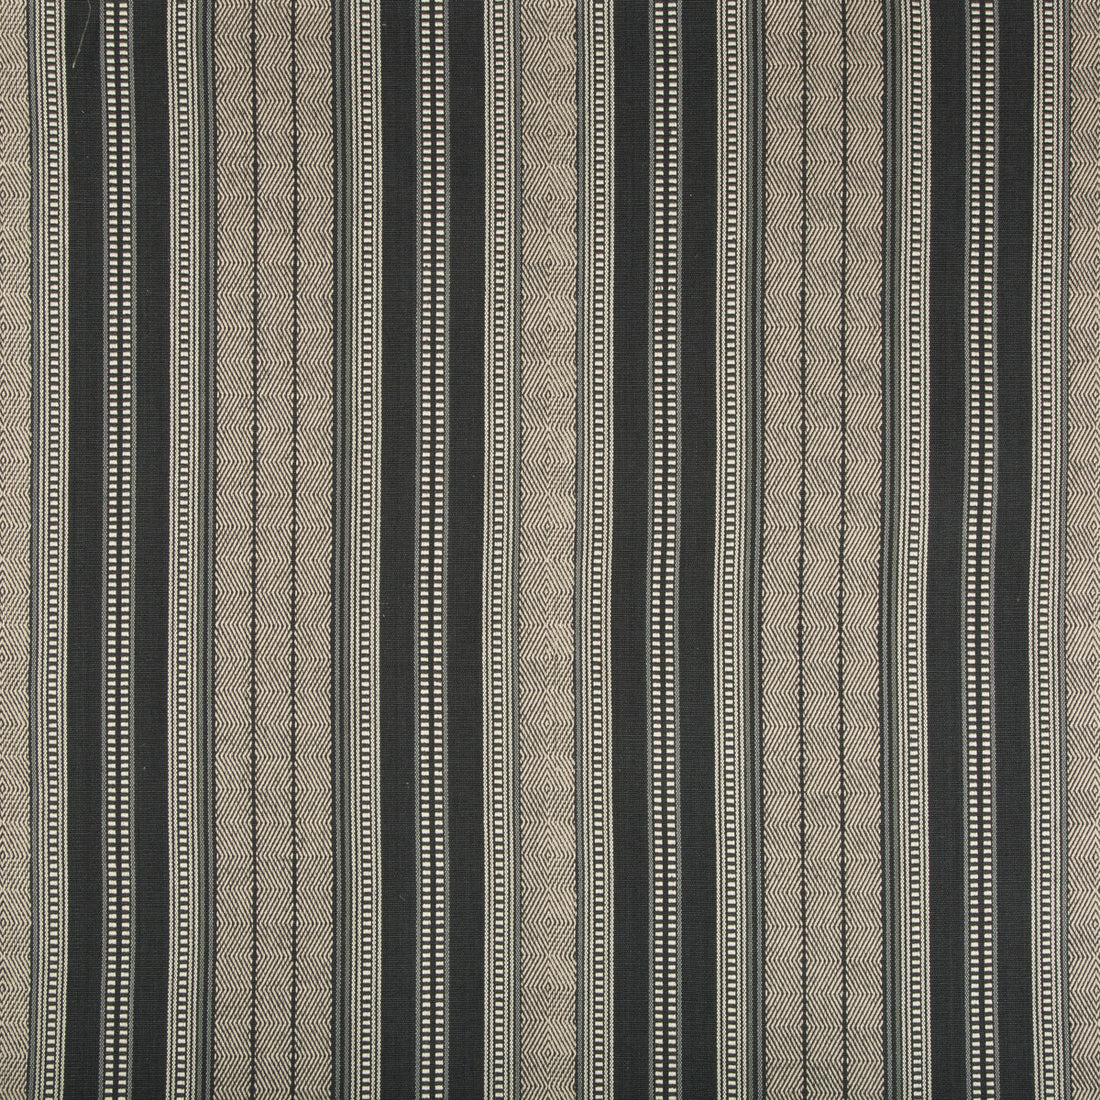 Lule Stripe fabric in ink color - pattern 34969.816.0 - by Kravet Design in the Barclay Butera Sagamore collection